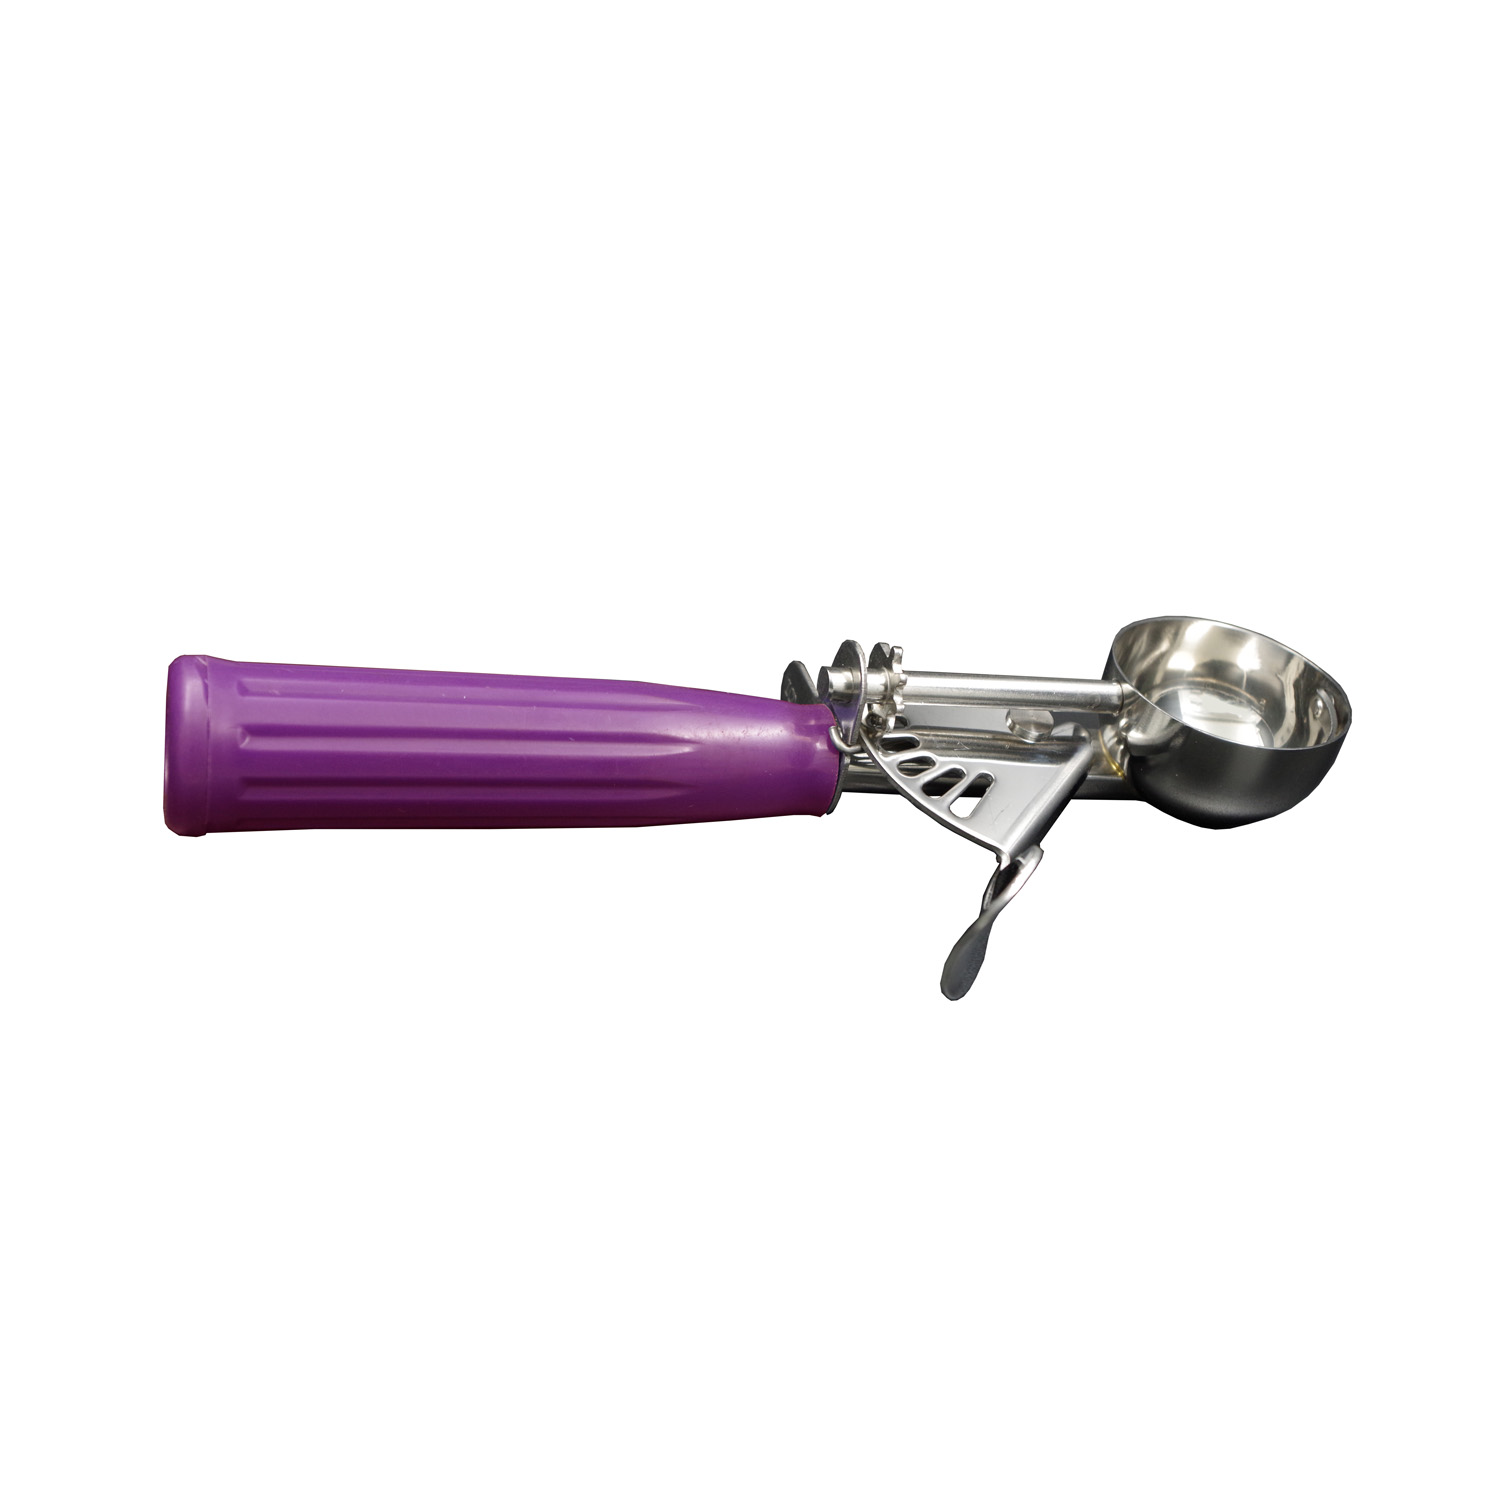 CAC China SICD-40OD Stainless Steel Thumb Disher with Orchid Handle 0.72 oz., #40